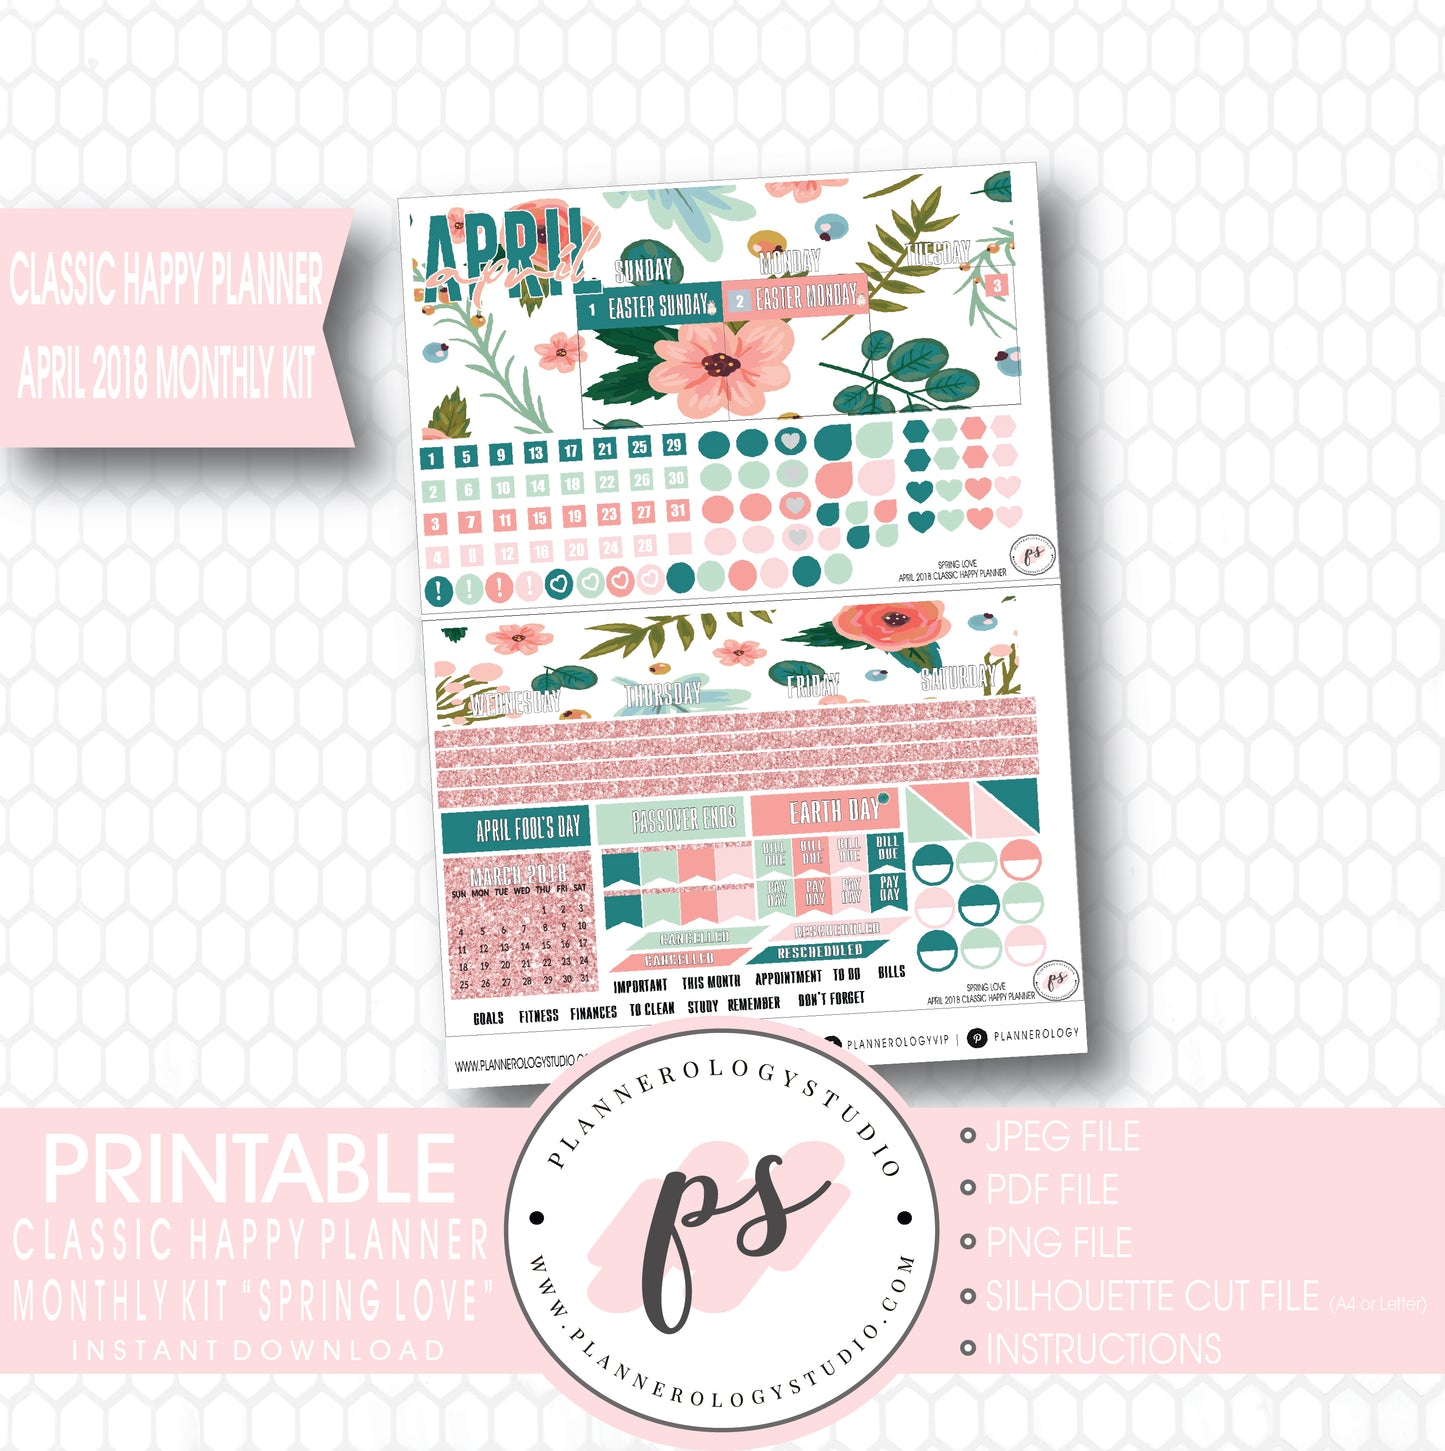 Spring Love April 2018 Monthly View Kit Digital Printable Planner Stickers (for use with Classic Happy Planner) - Plannerologystudio